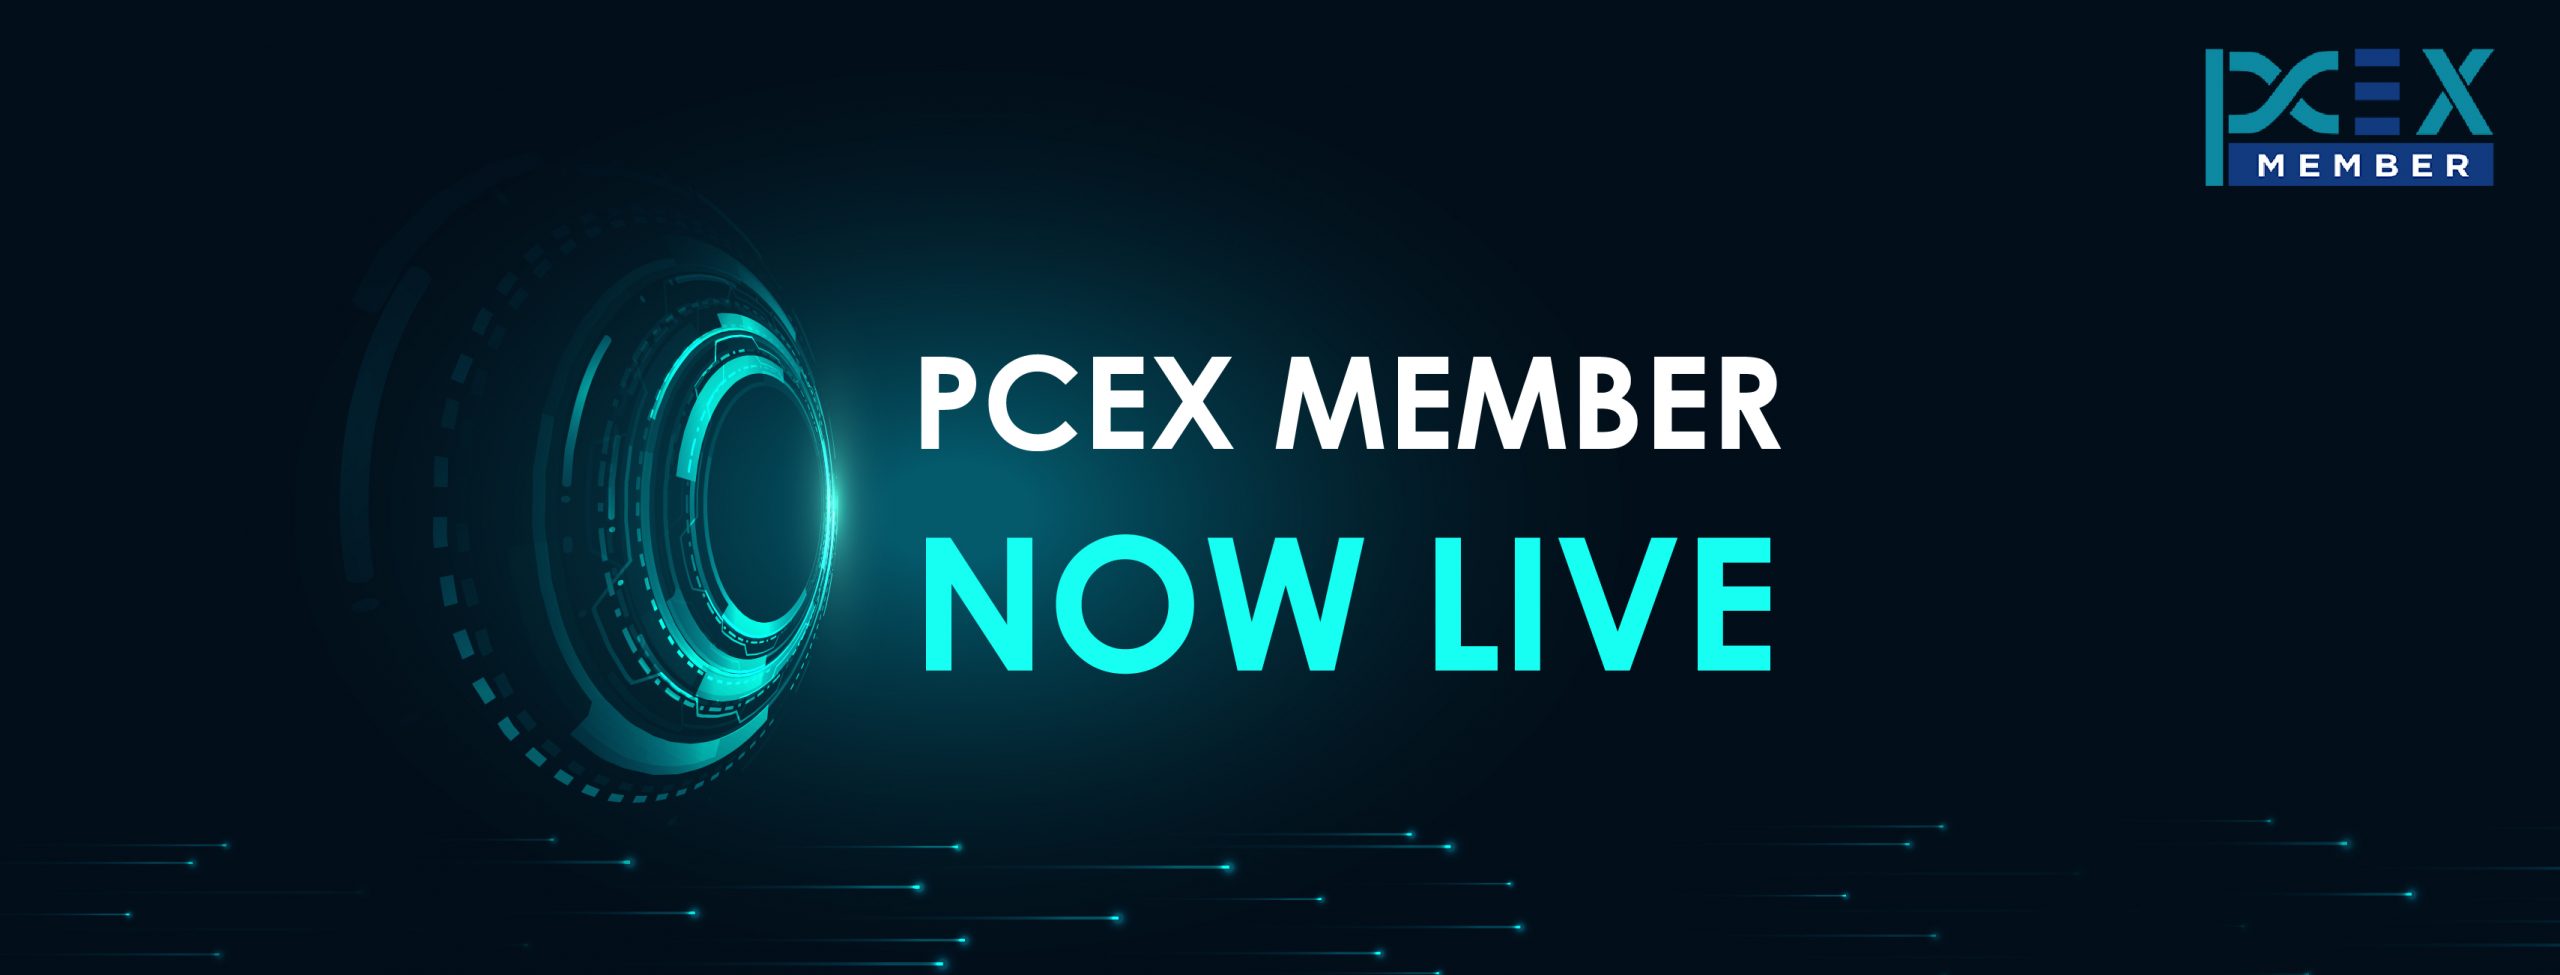 PCEX Member- Crypto Trading Platform Launched in India!